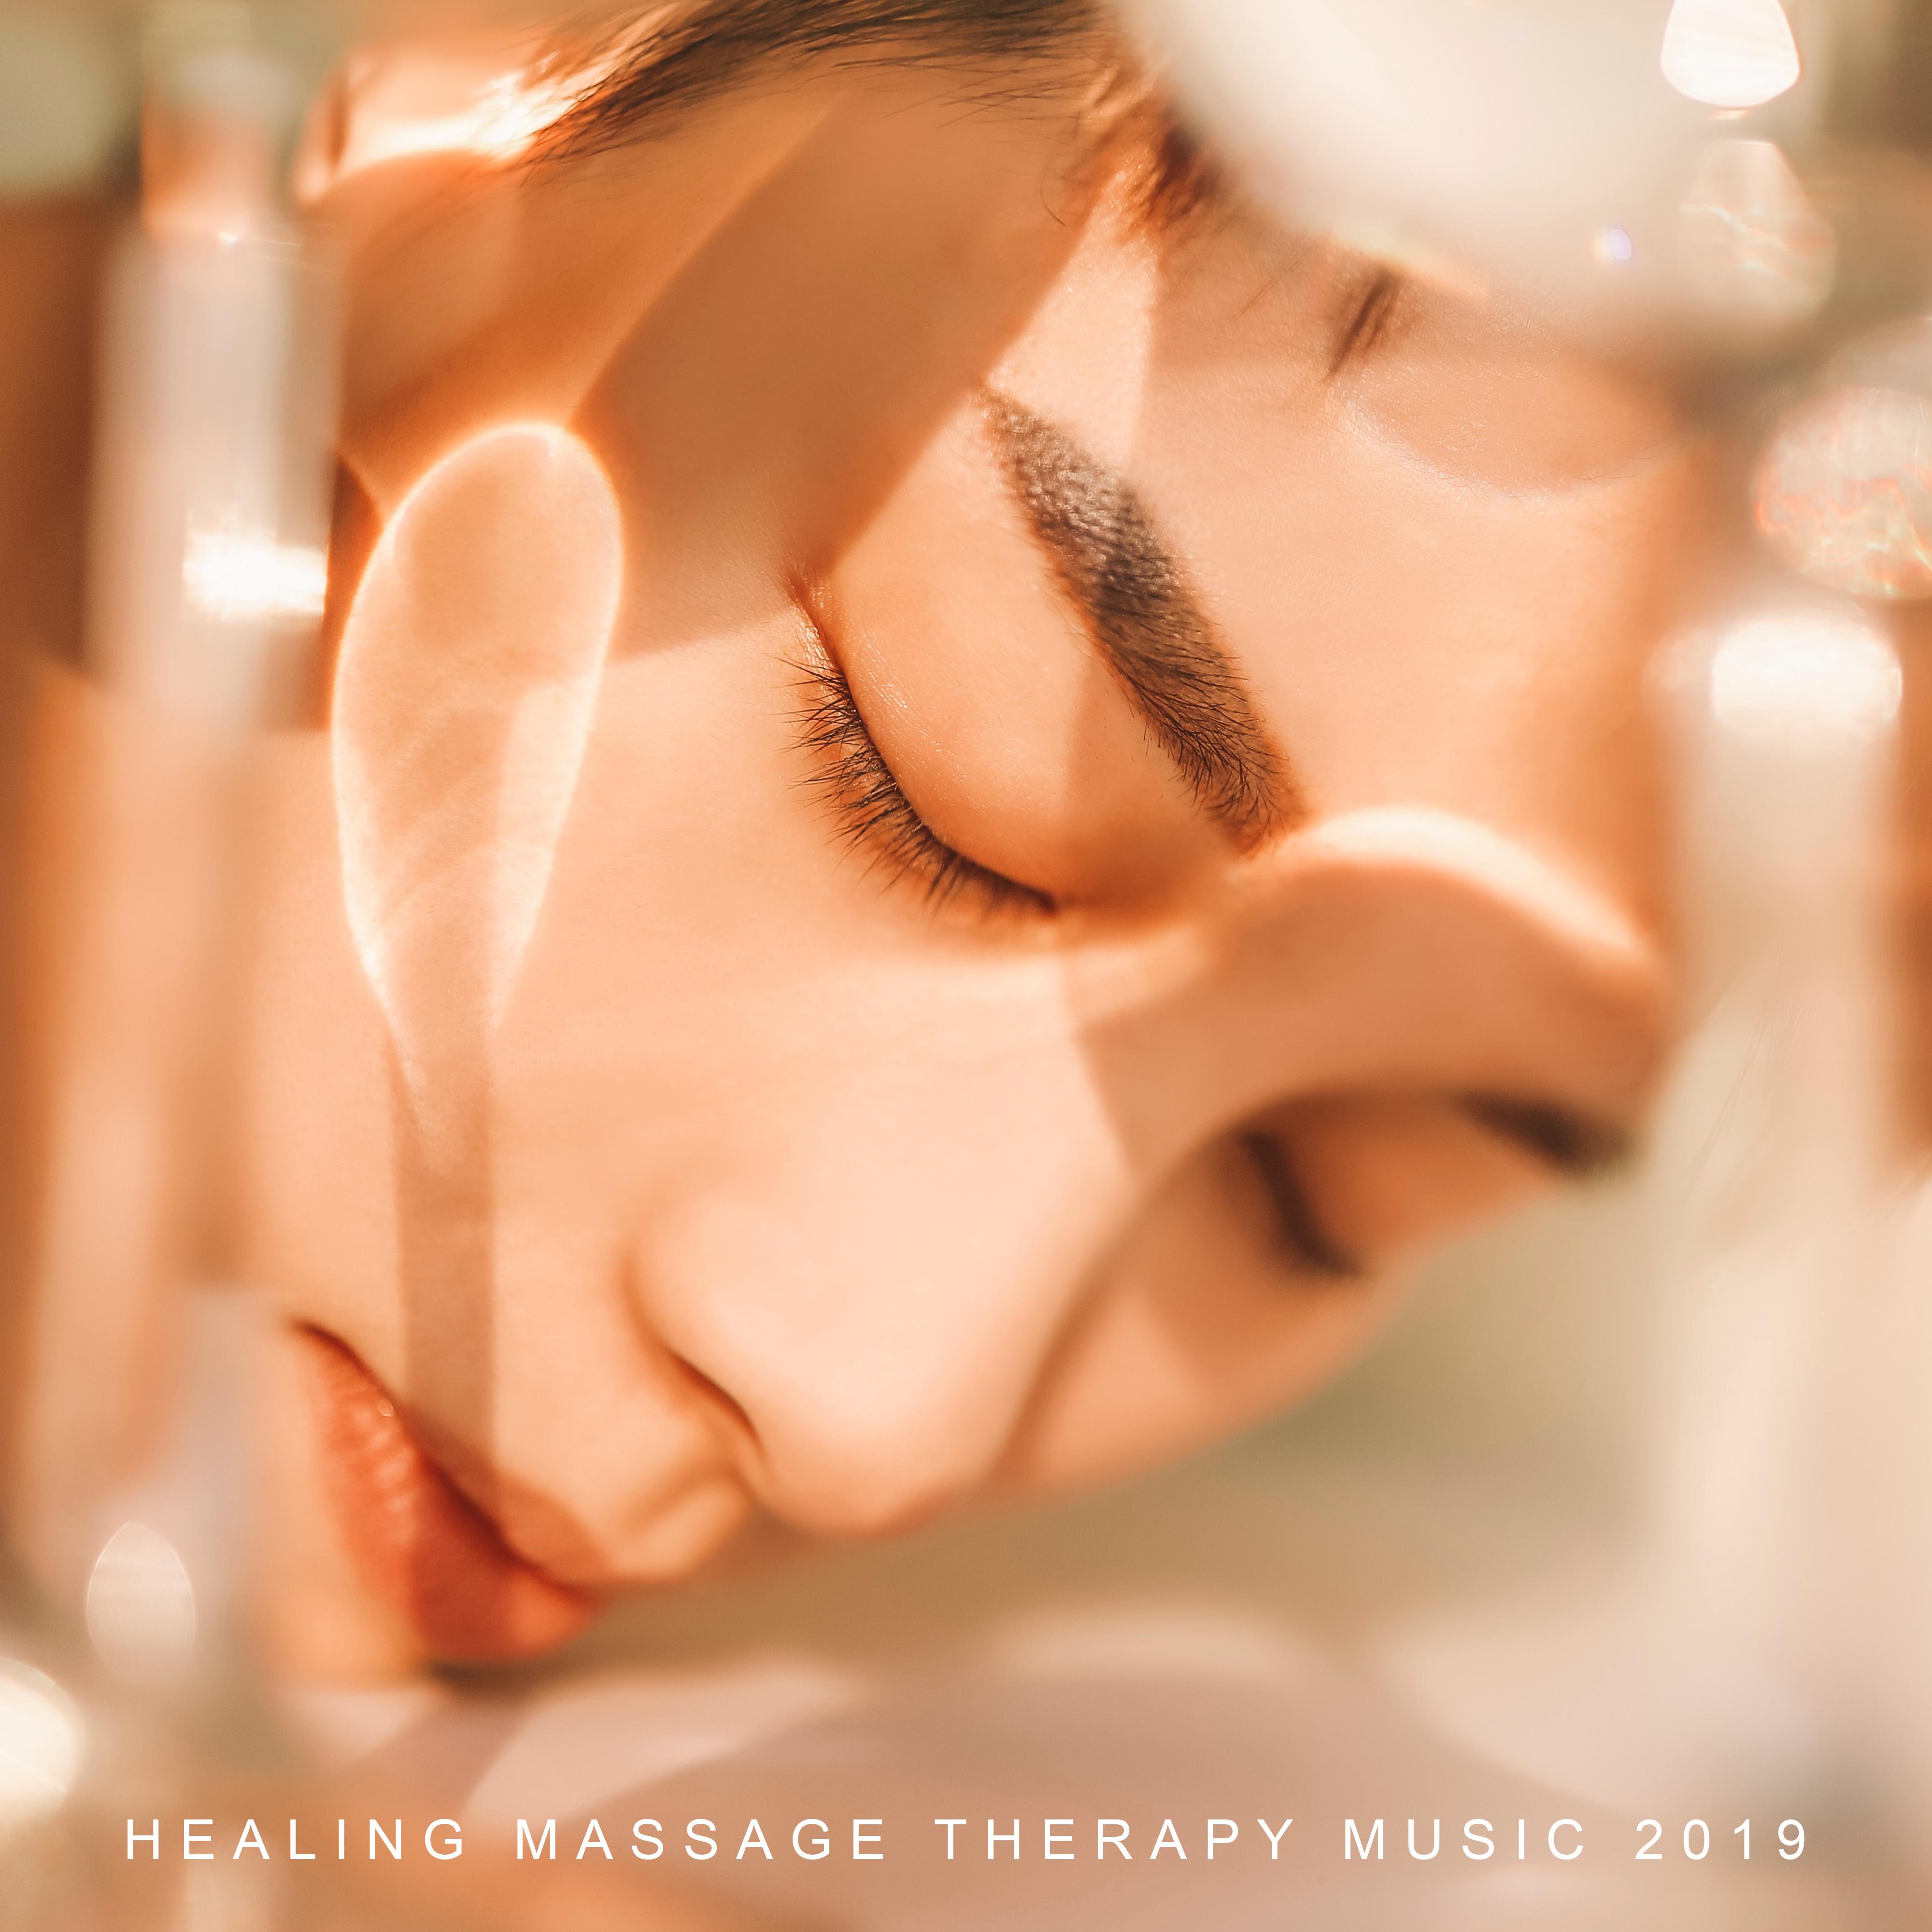 Healing Massage Therapy Music 2019  New Age Music Mix Created for Spa  Wellness, Perfect Background Songs for Massage  Relaxation